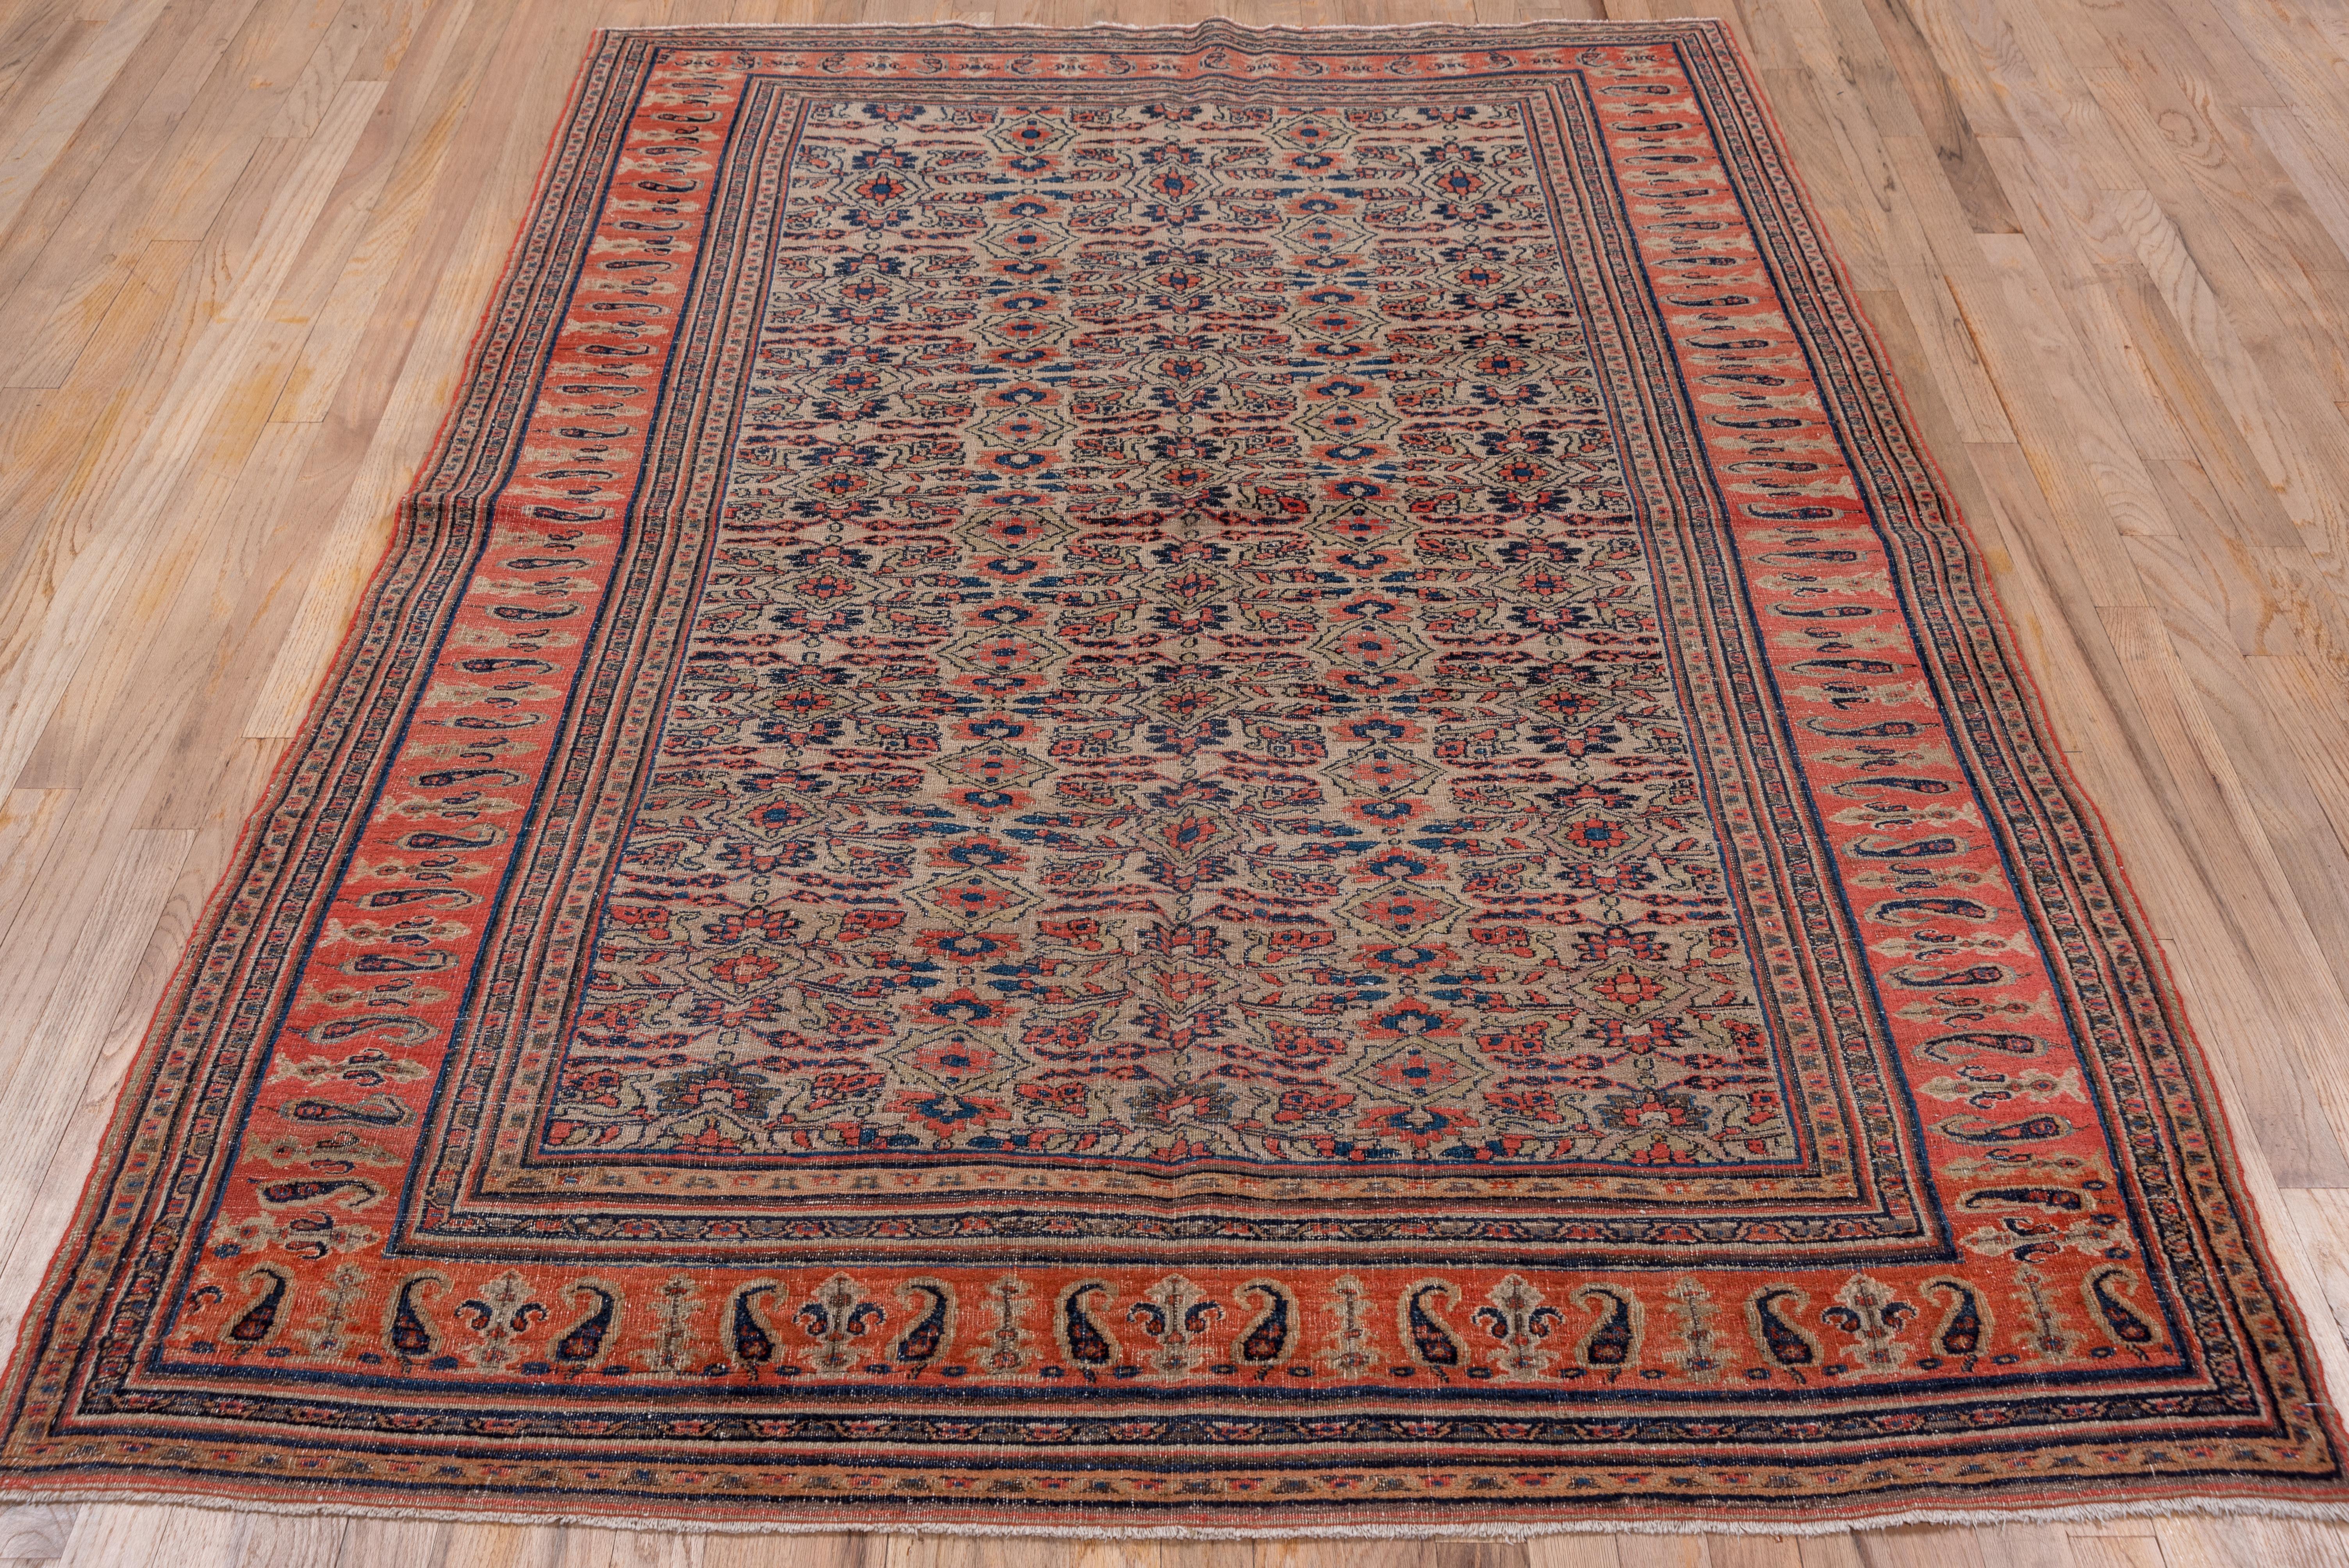 This NE Persian town scatter features an oatmeal field with a variant on the popular Herati design. Here the usual 'fish' leaves have been flattened and minimized. The orange-red main border shows slender, standing botehs and lesser botehs paired